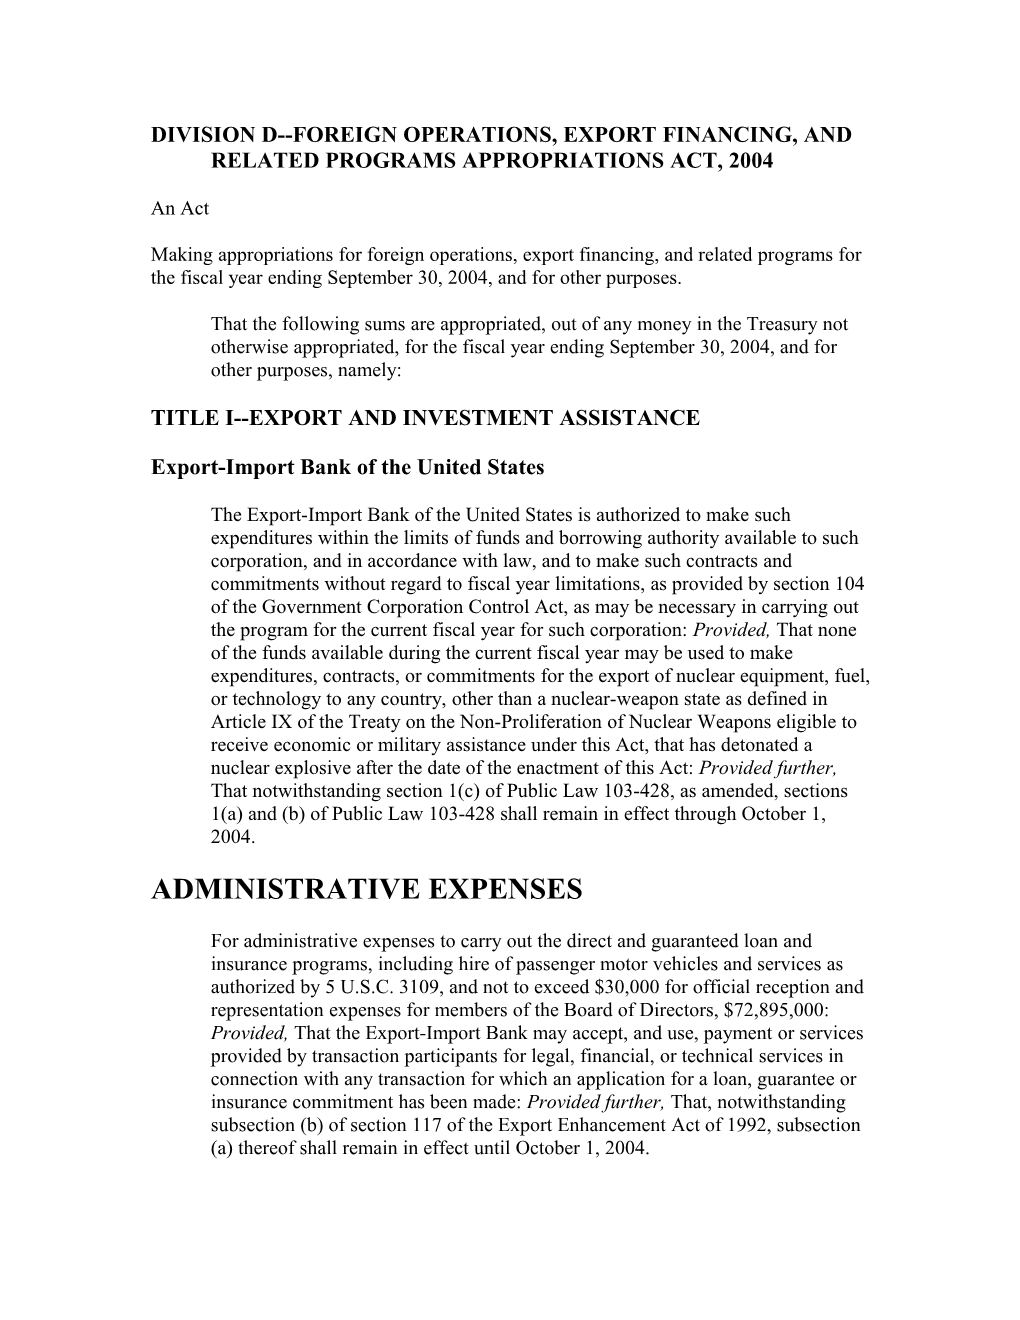 Division D Foreign Operations, Export Financing, and Related Programs Appropriations Act, 2004